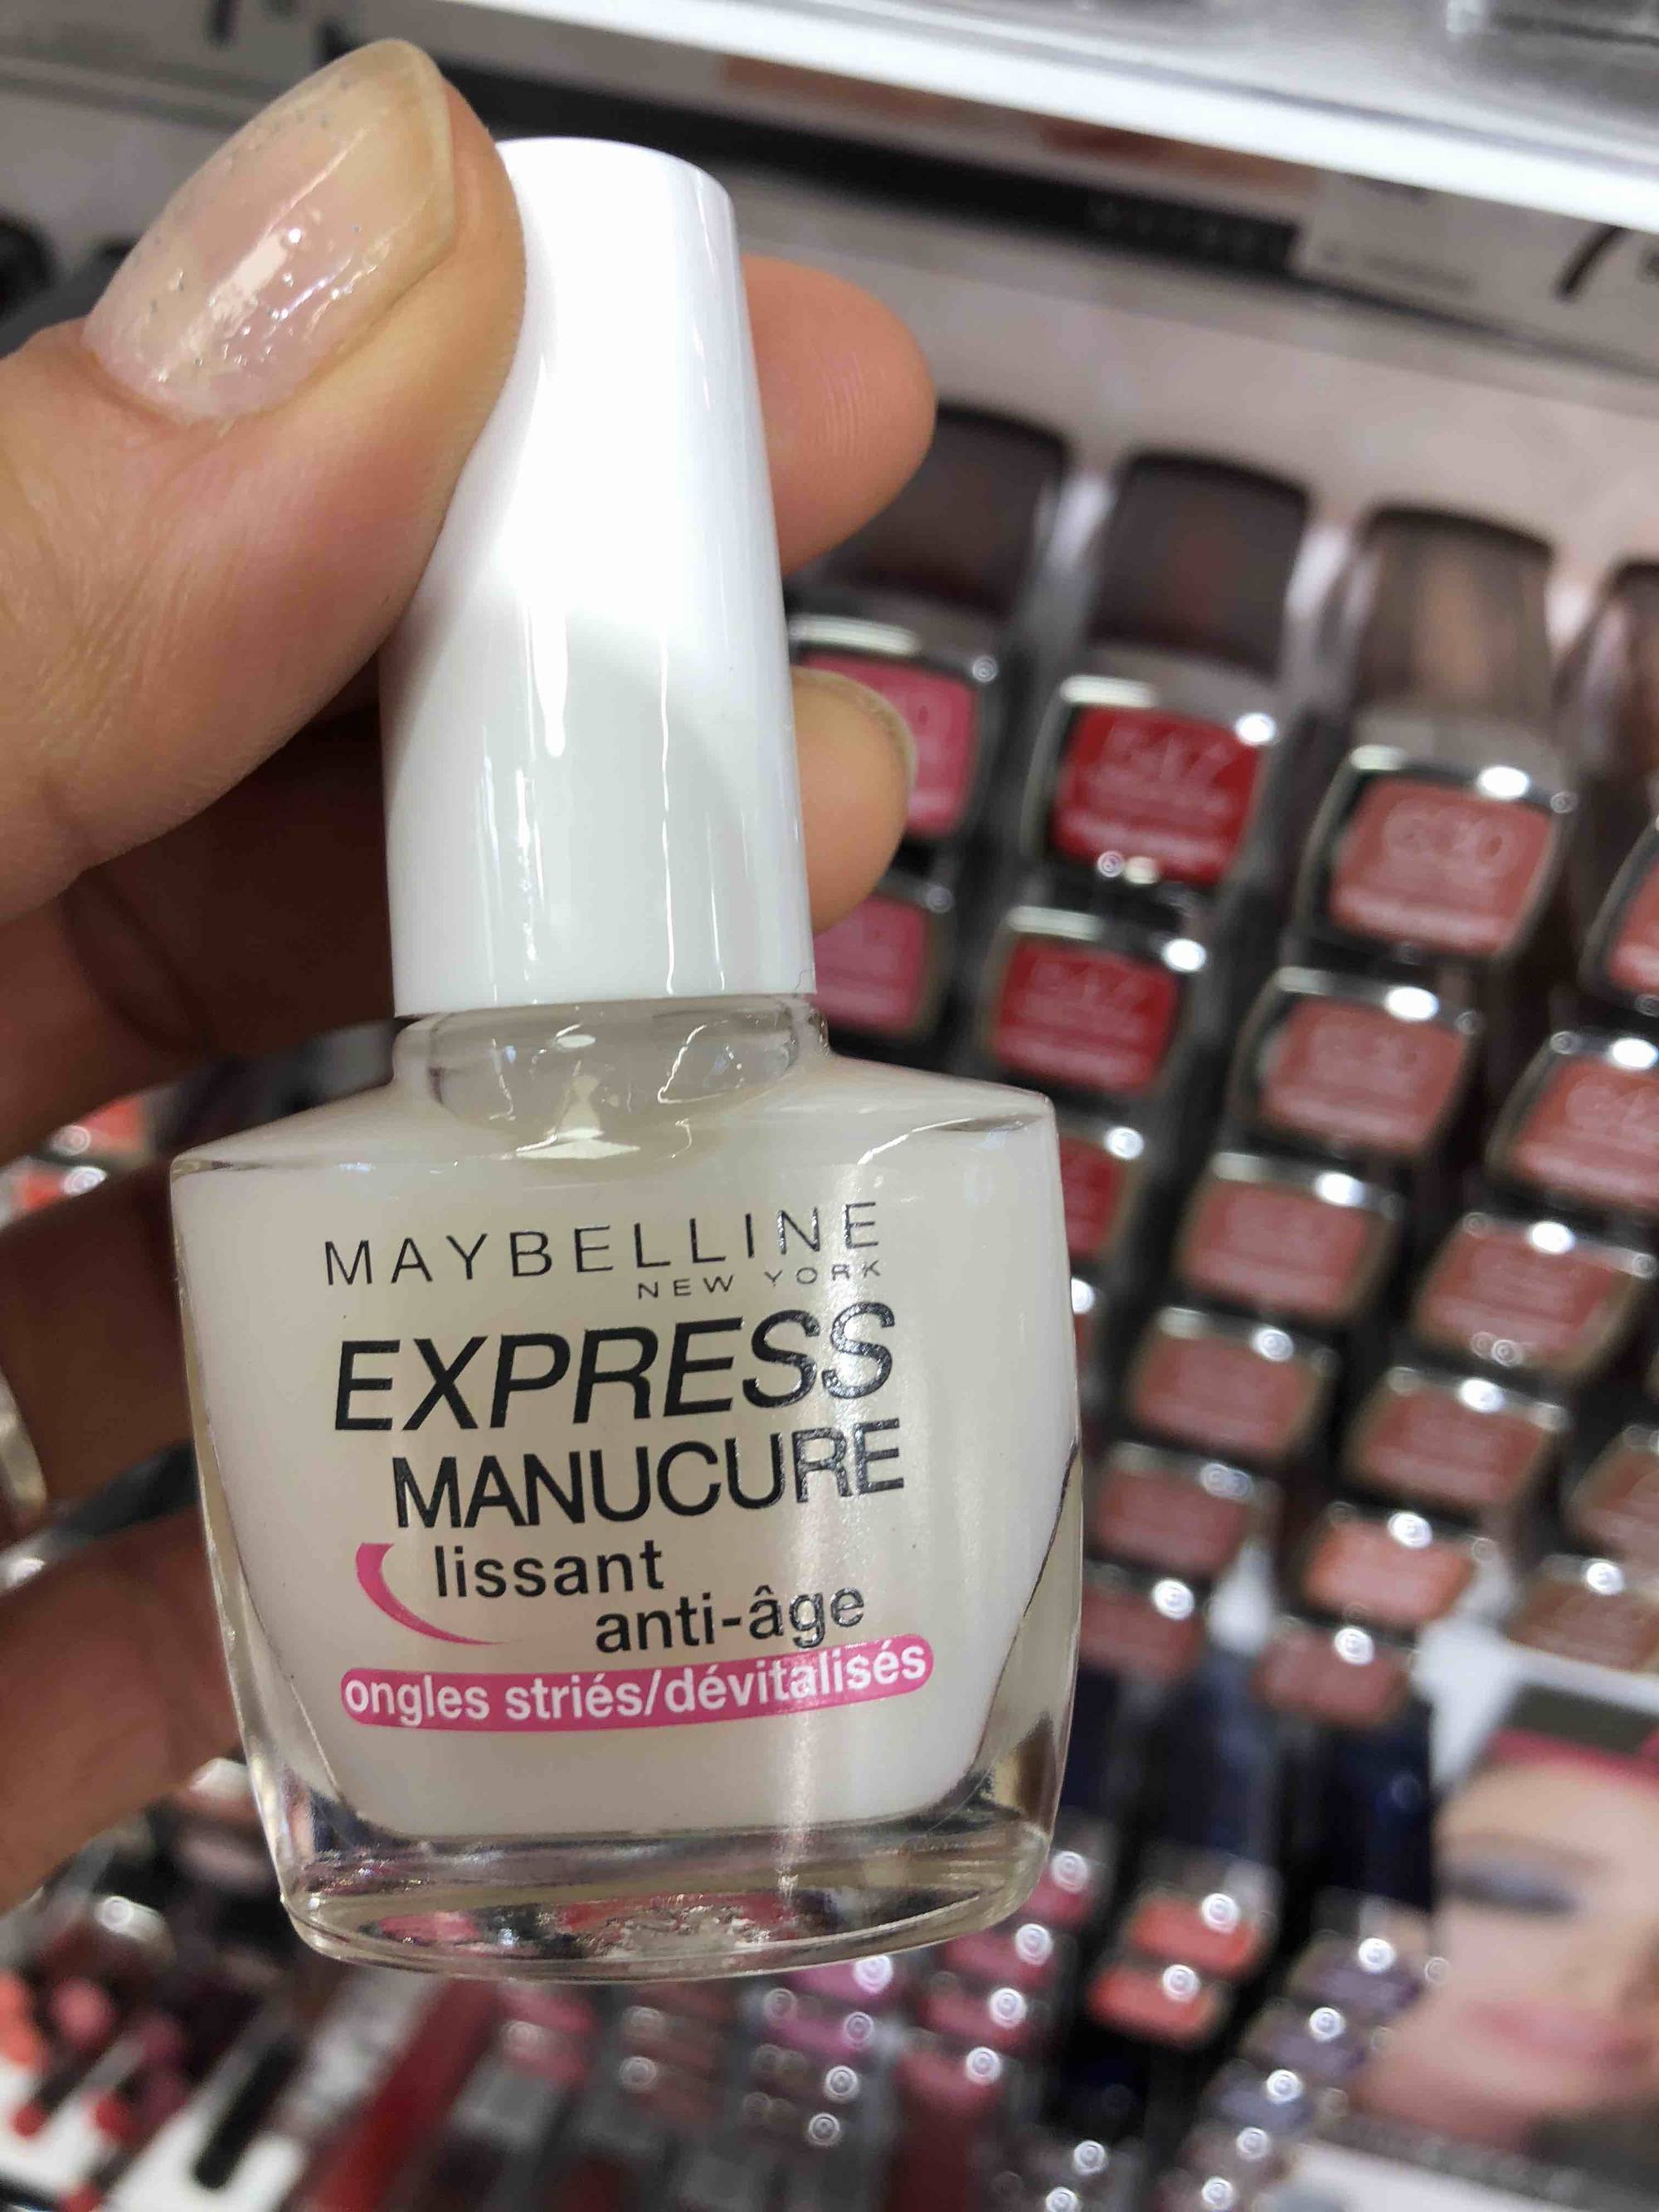 Composition MAYBELLINE Express manucure white - Soin blanchissant - UFC-Que  Choisir